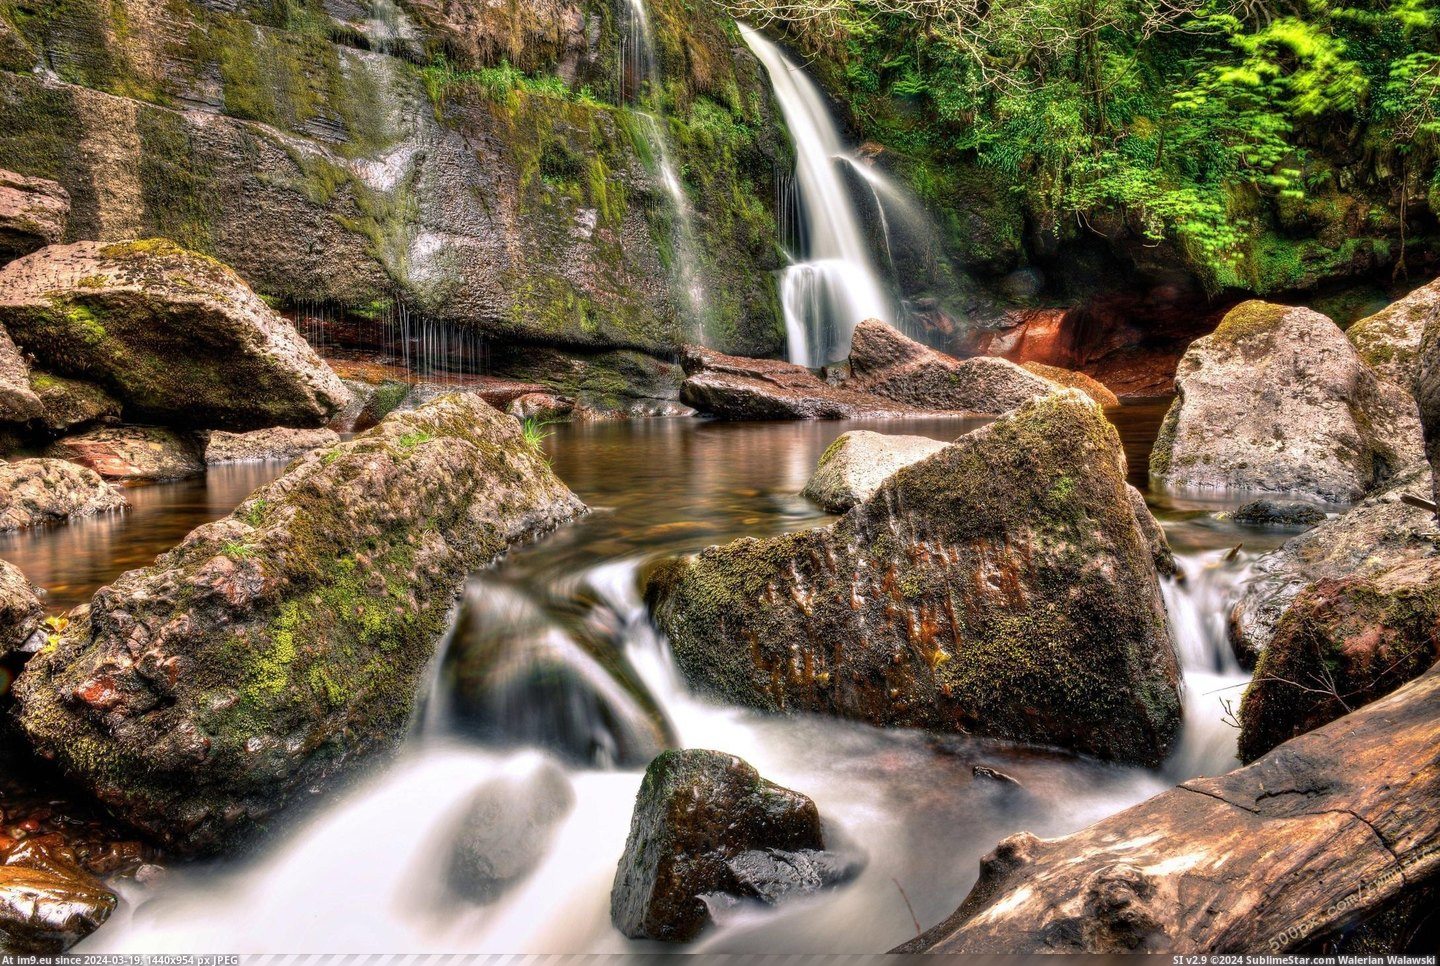 #Find #Waterfall #Secluded #Argyll #Nameless #Scotland #Locals [Earthporn] Only us locals will be able to tell you how to find this secluded, nameless waterfall in Argyll, Scotland. [2180x145 Pic. (Image of album My r/EARTHPORN favs))